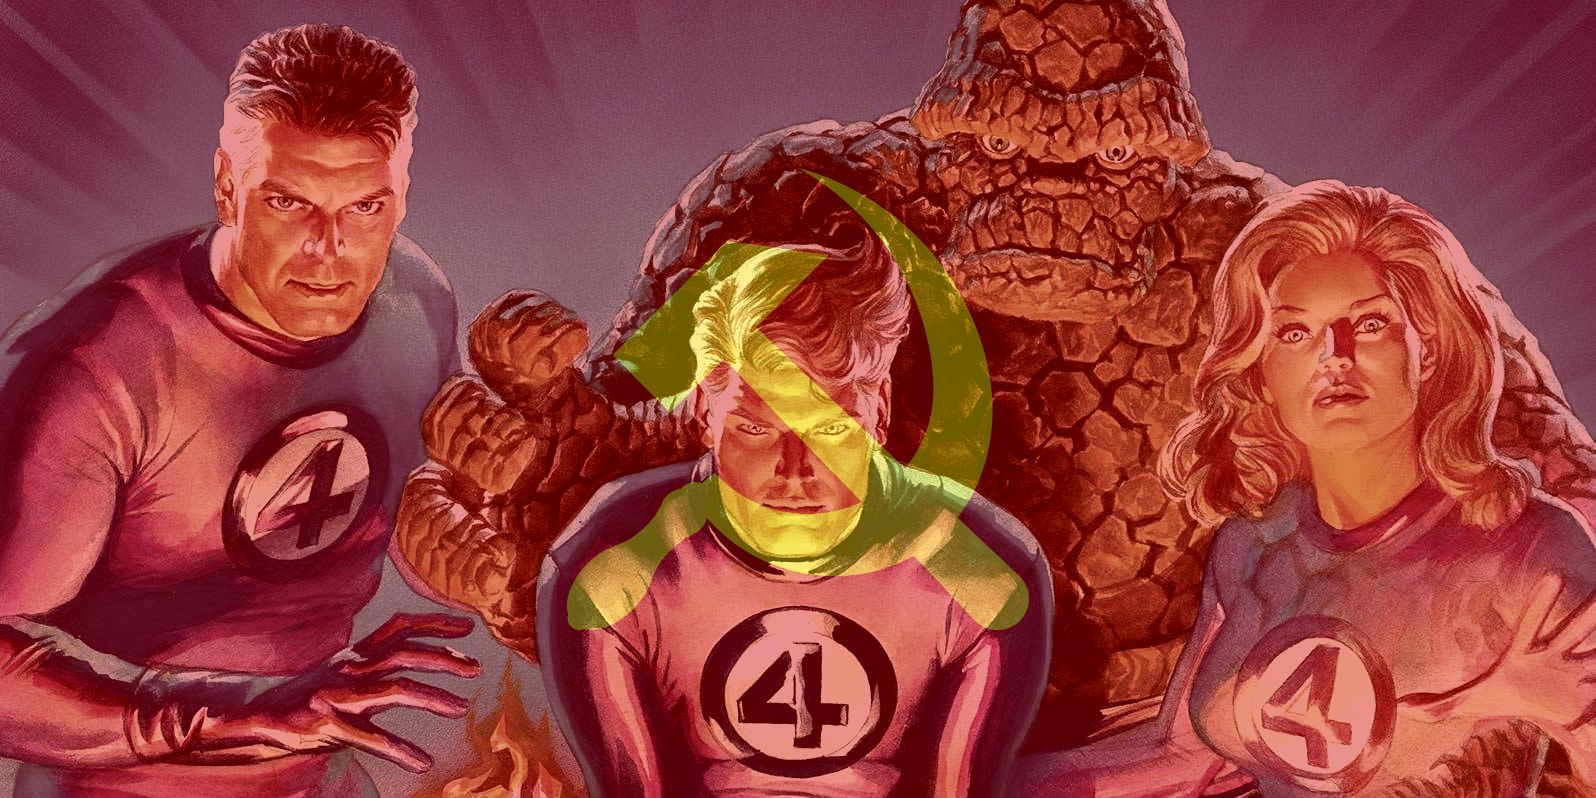 Alex Ross' Fantastic Four with the Soviet hammer and sickle superimposed